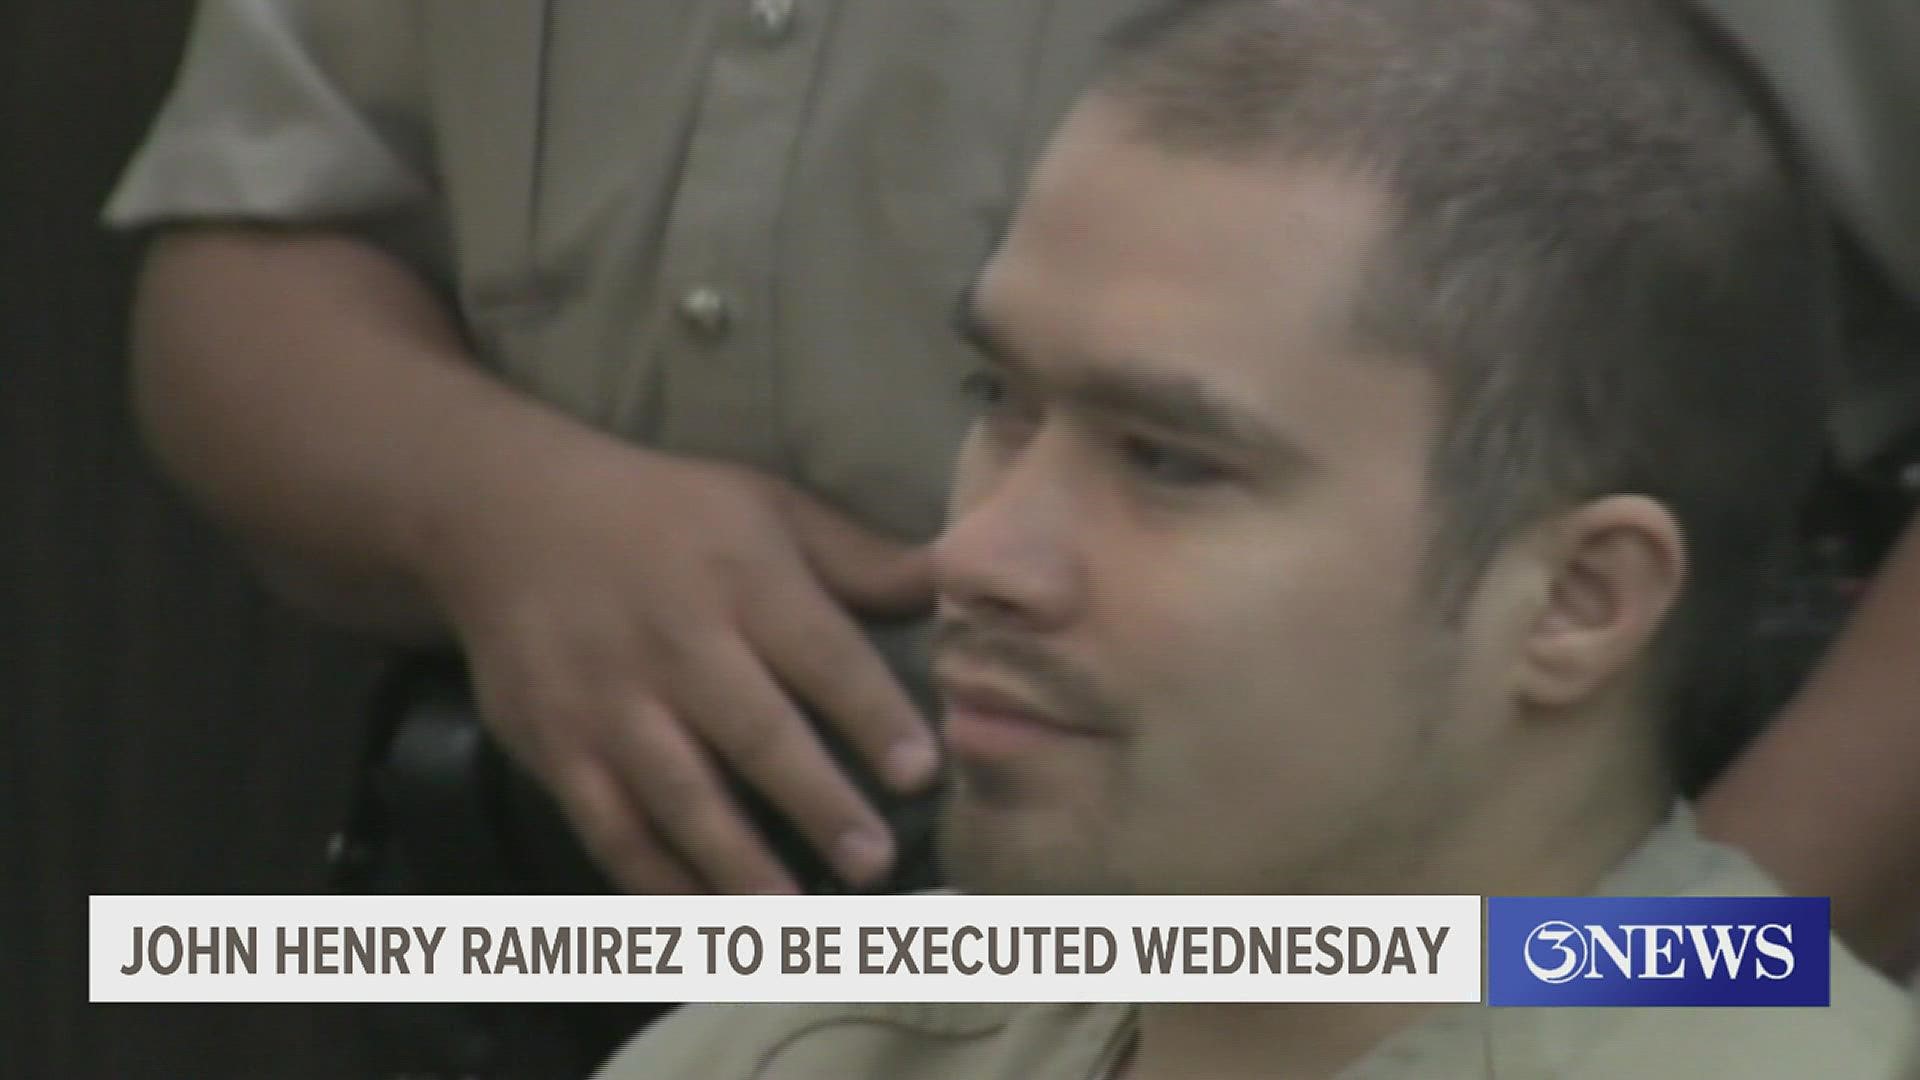 It was back in March when the U.S. Supreme Court granted Ramirez's request for his pastor to place his hands on him and pray aloud during his execution.